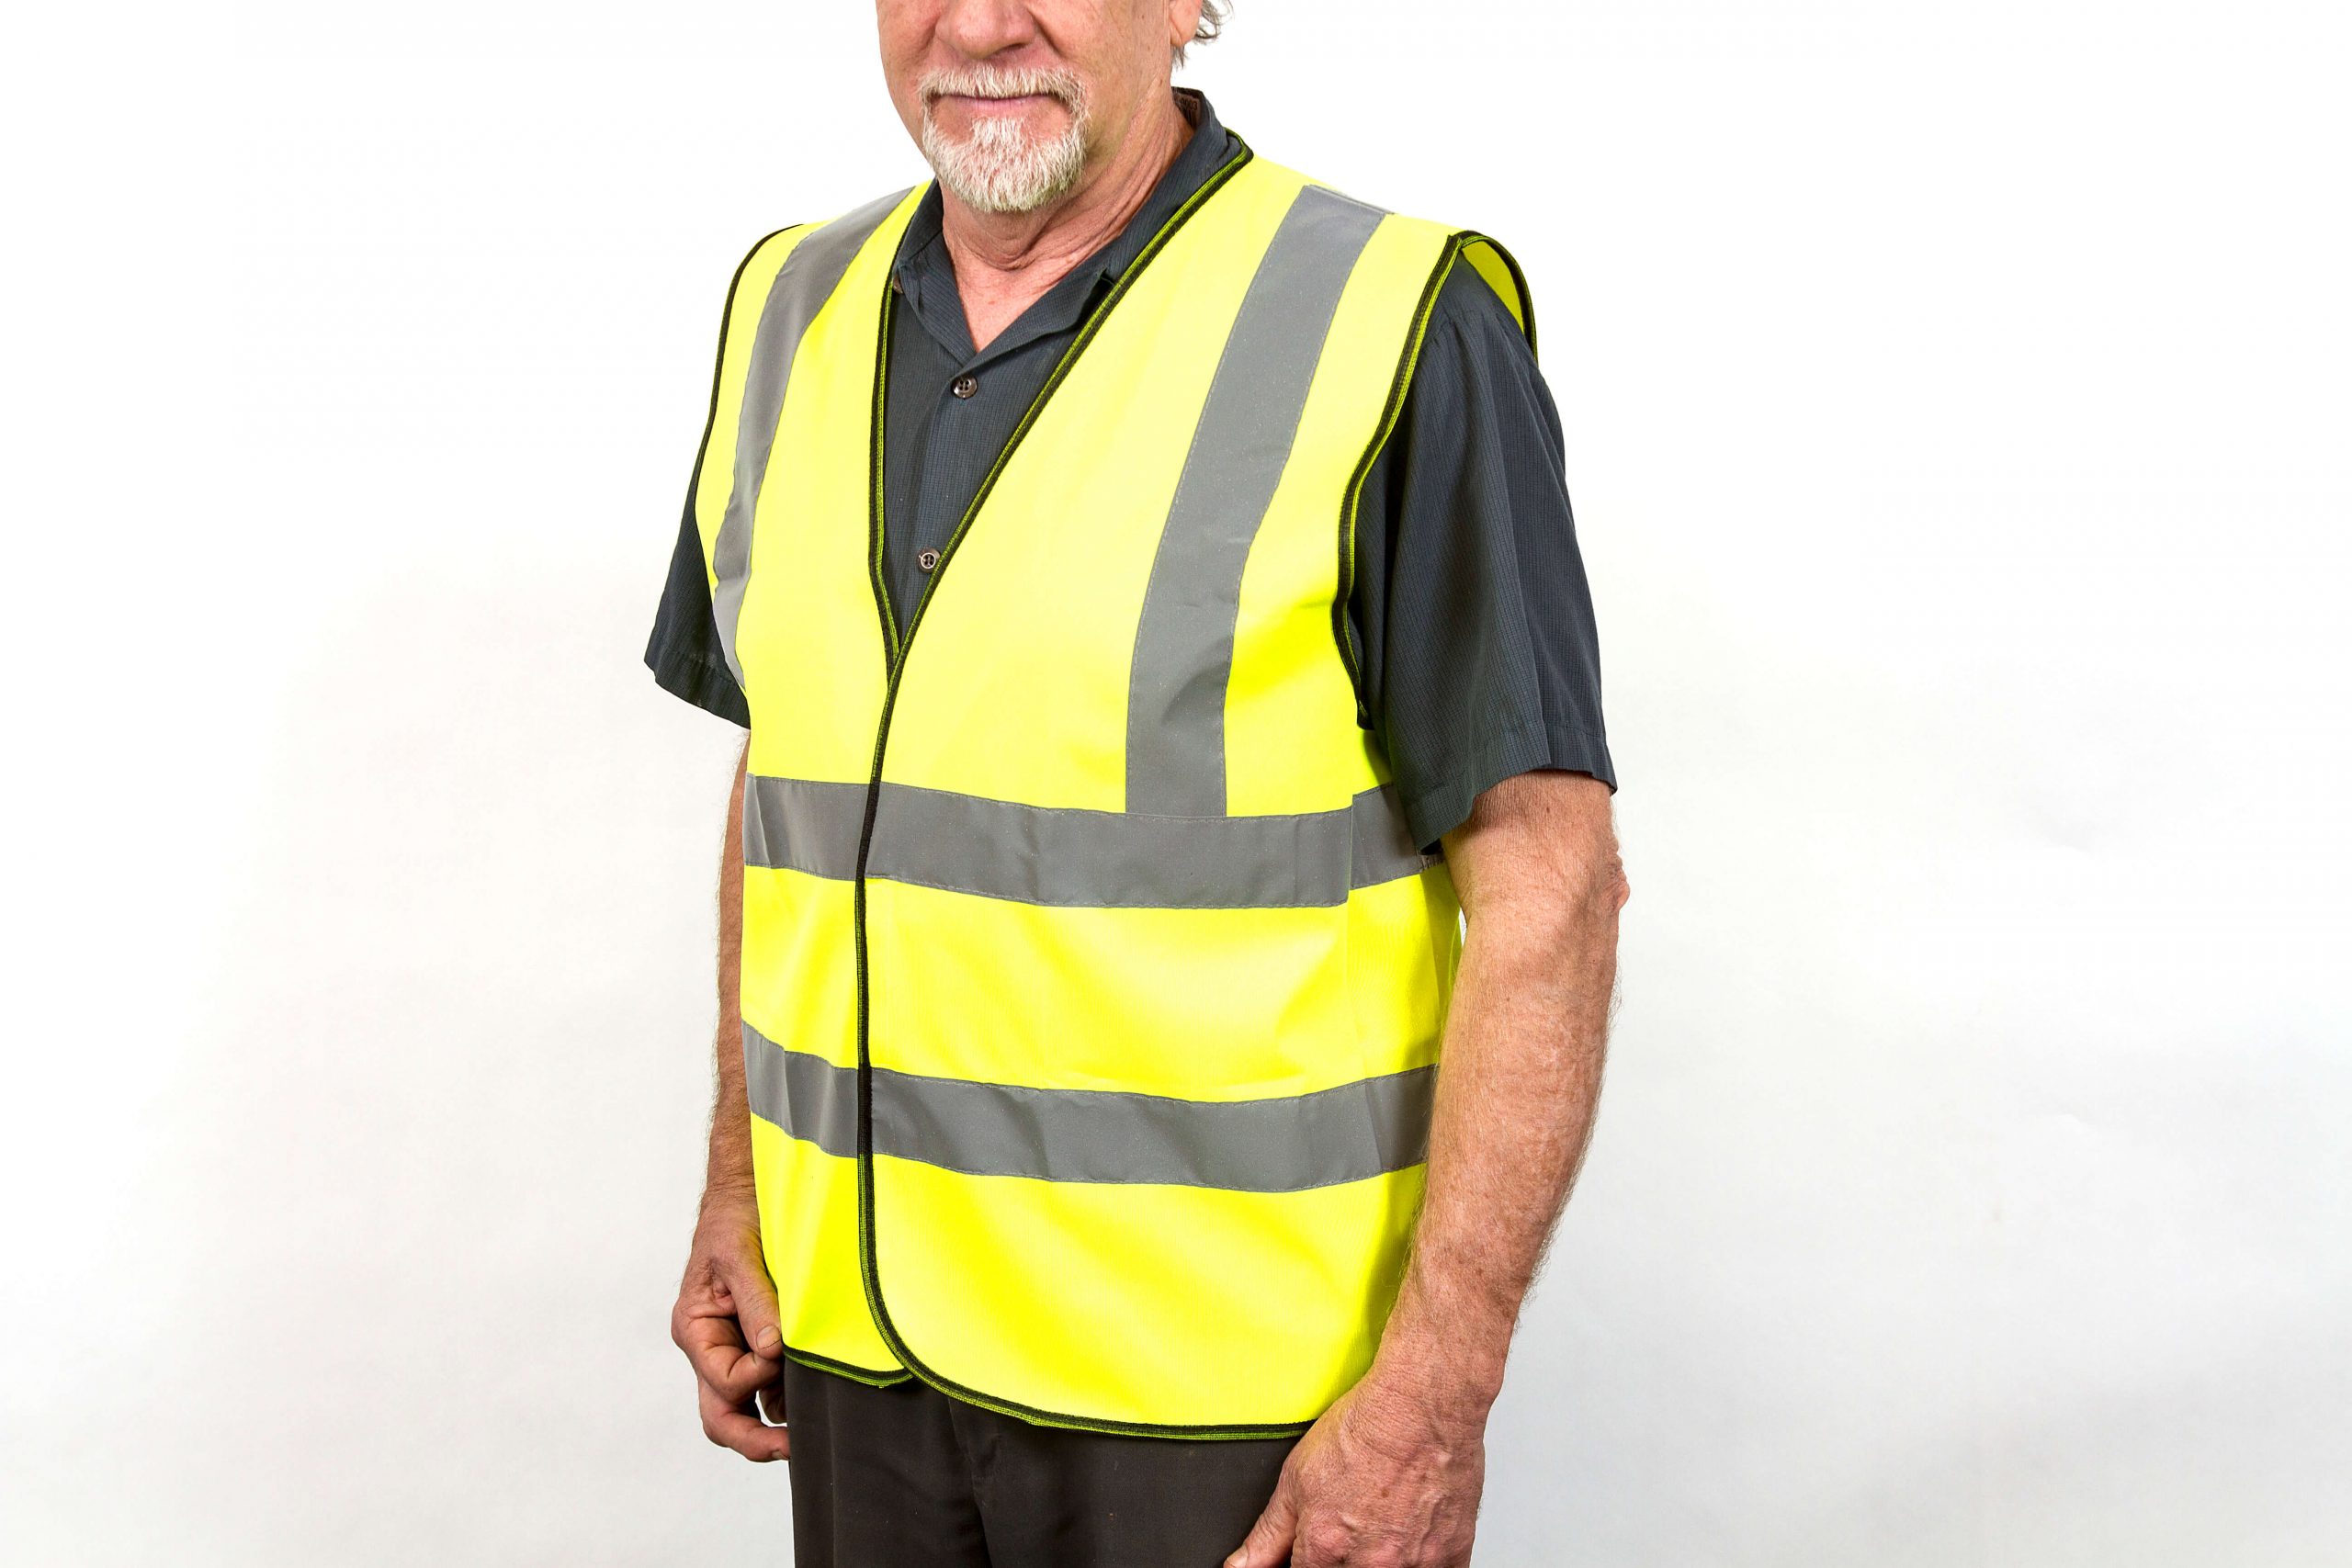 Man wearing a yellow safety vest